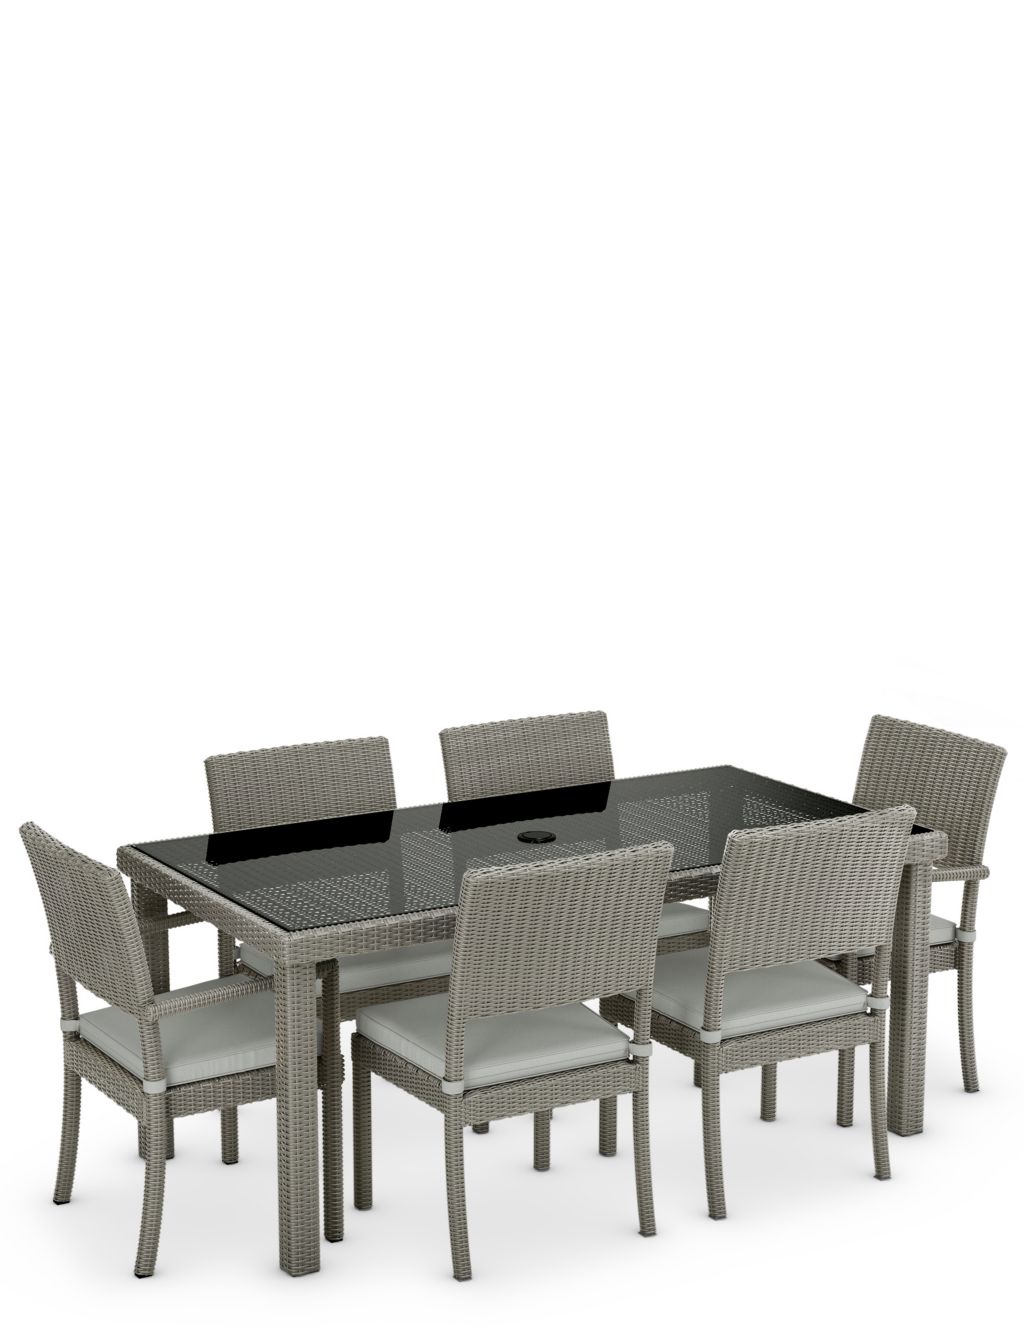 Marlow 6 Seater Rattan Effect Garden Dining Table & Chairs